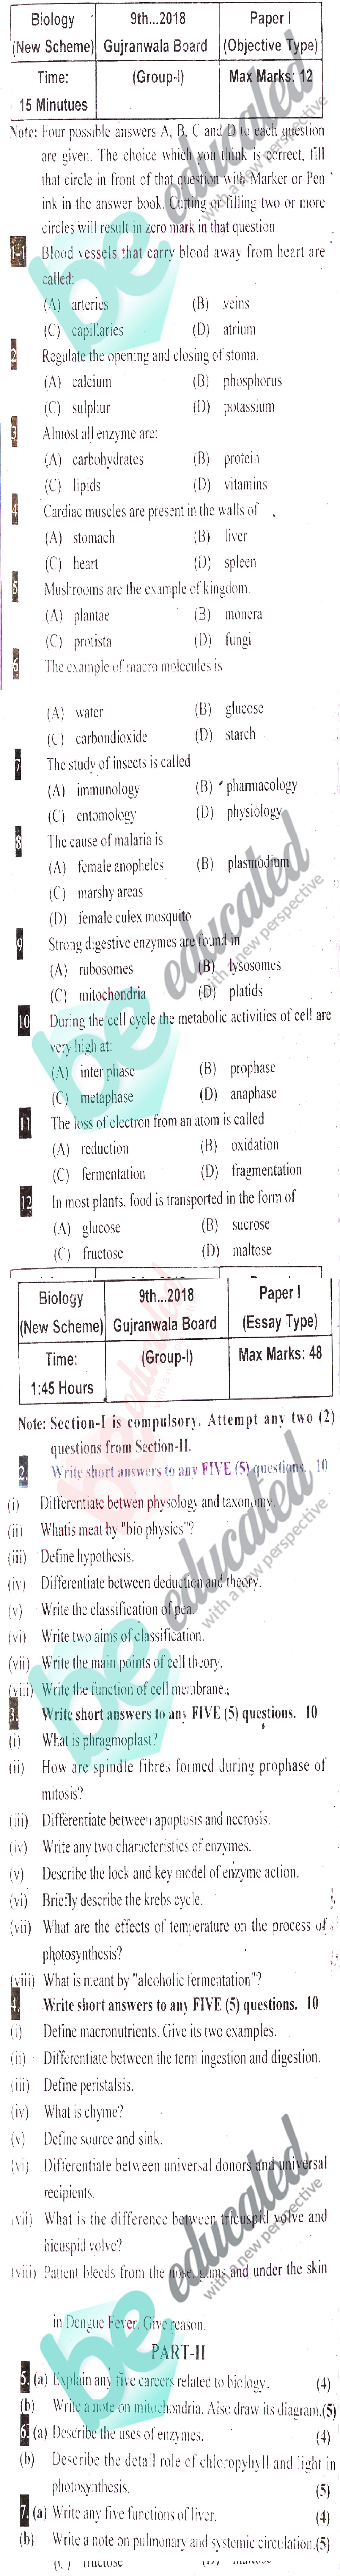 Biology 9th Class English Medium Past Paper Group 1 BISE Gujranwala 2018